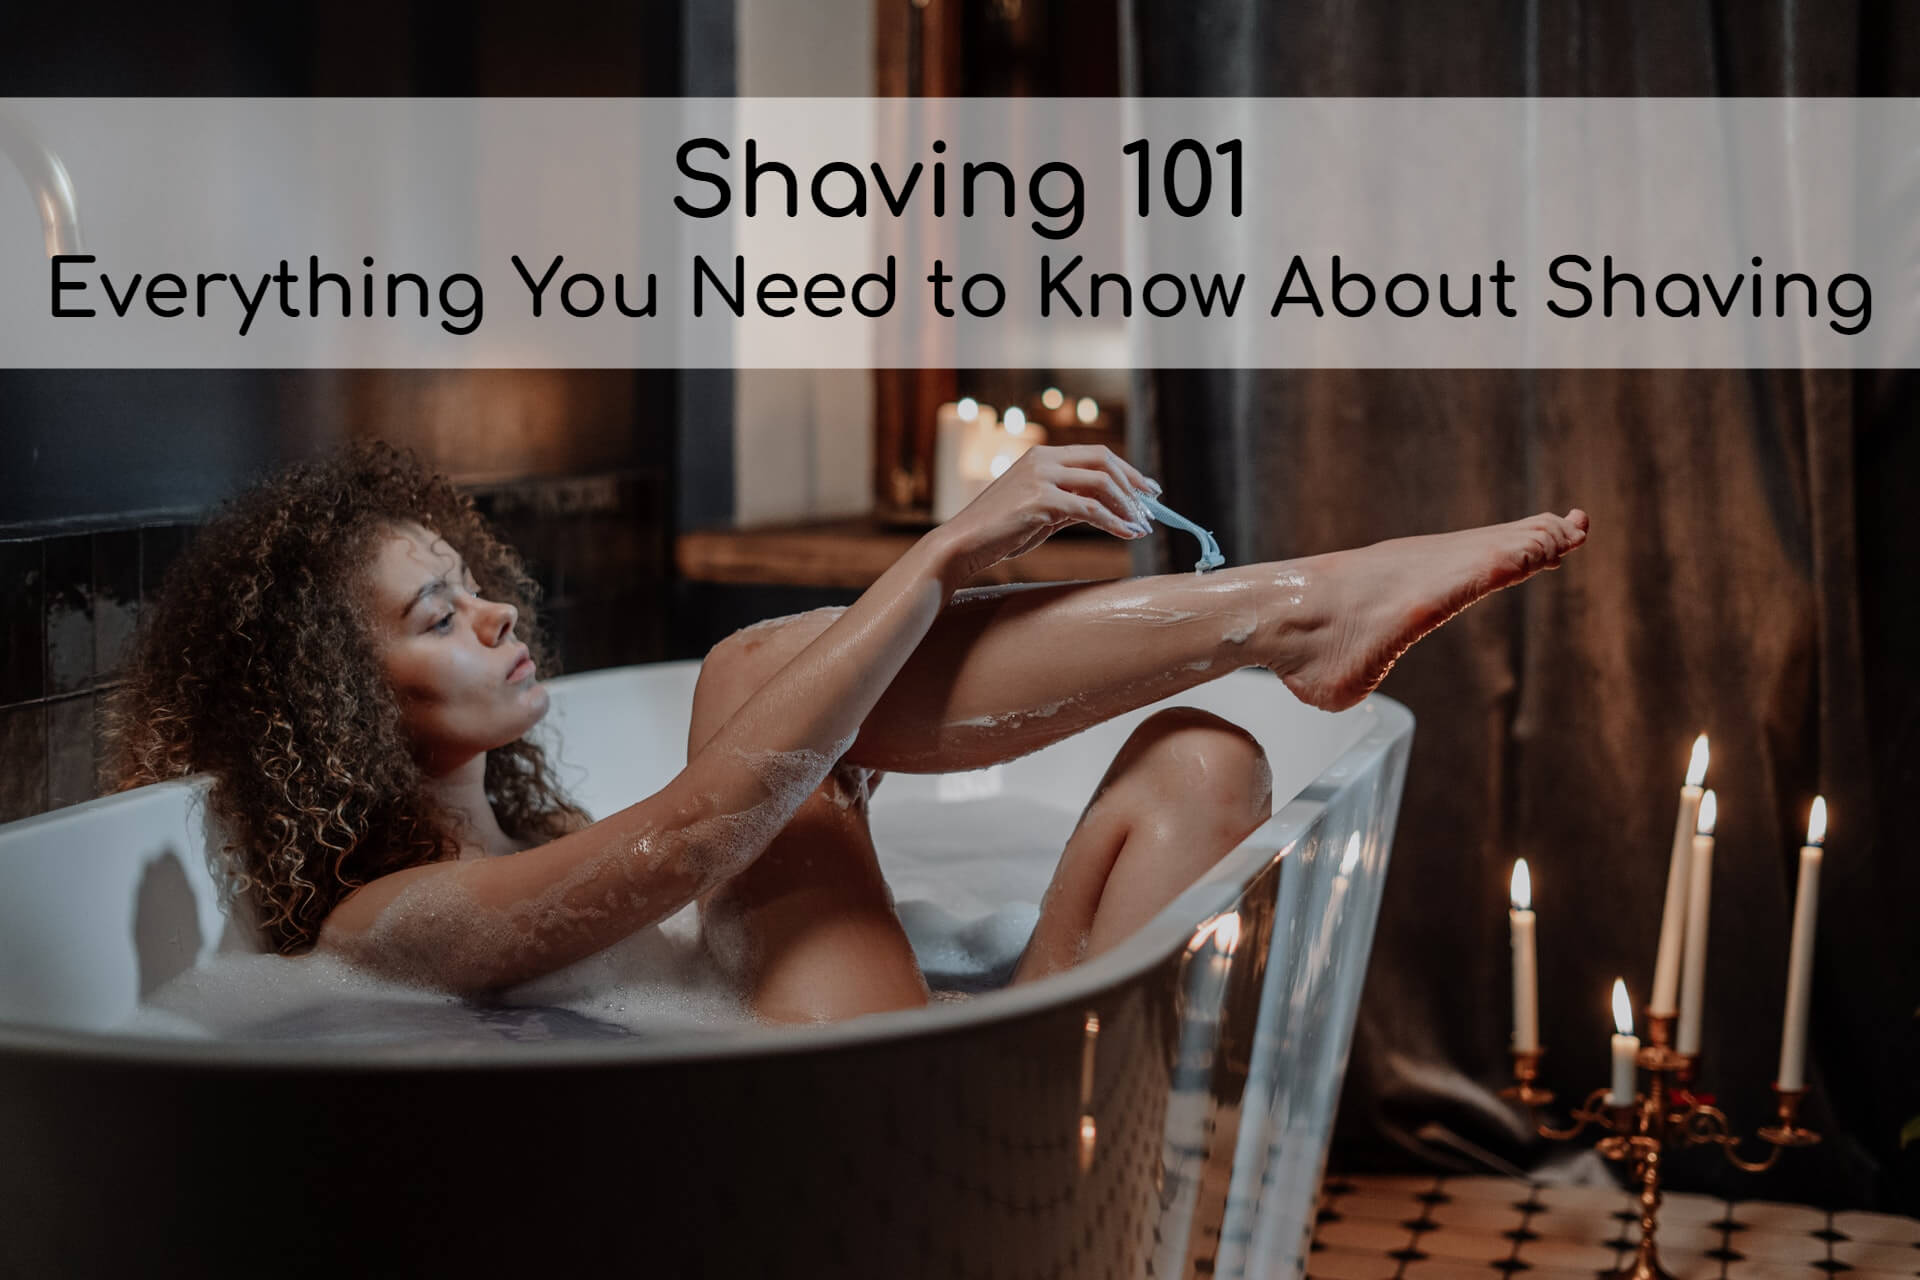 Shaving 101: Everything You Need to Know About Shaving